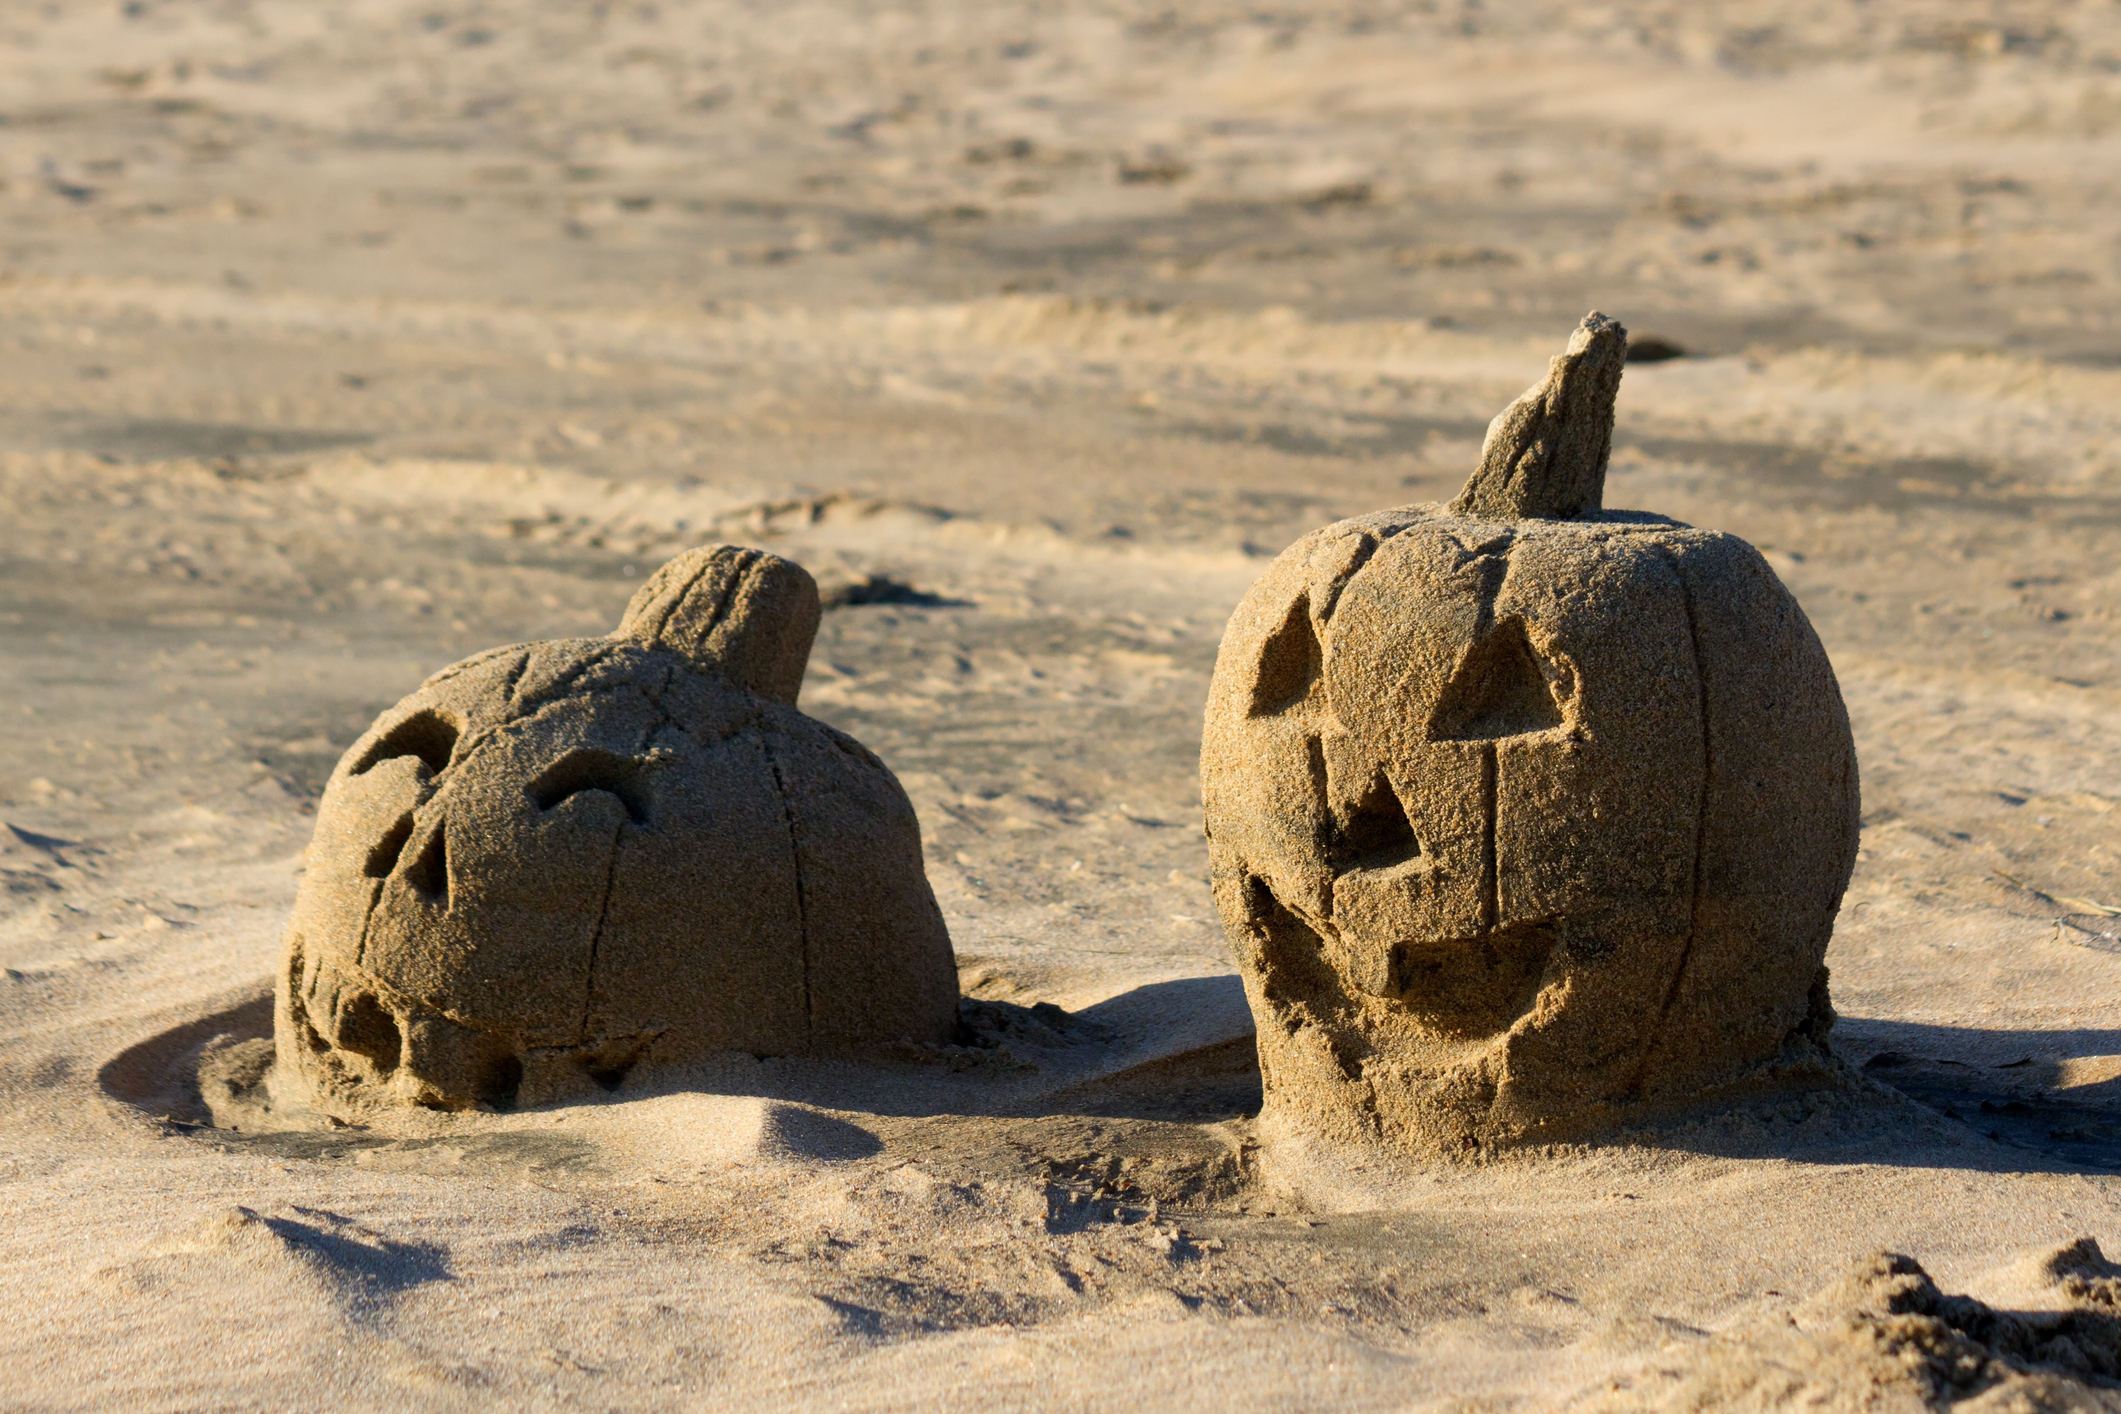 Sand pumpkins can stay.